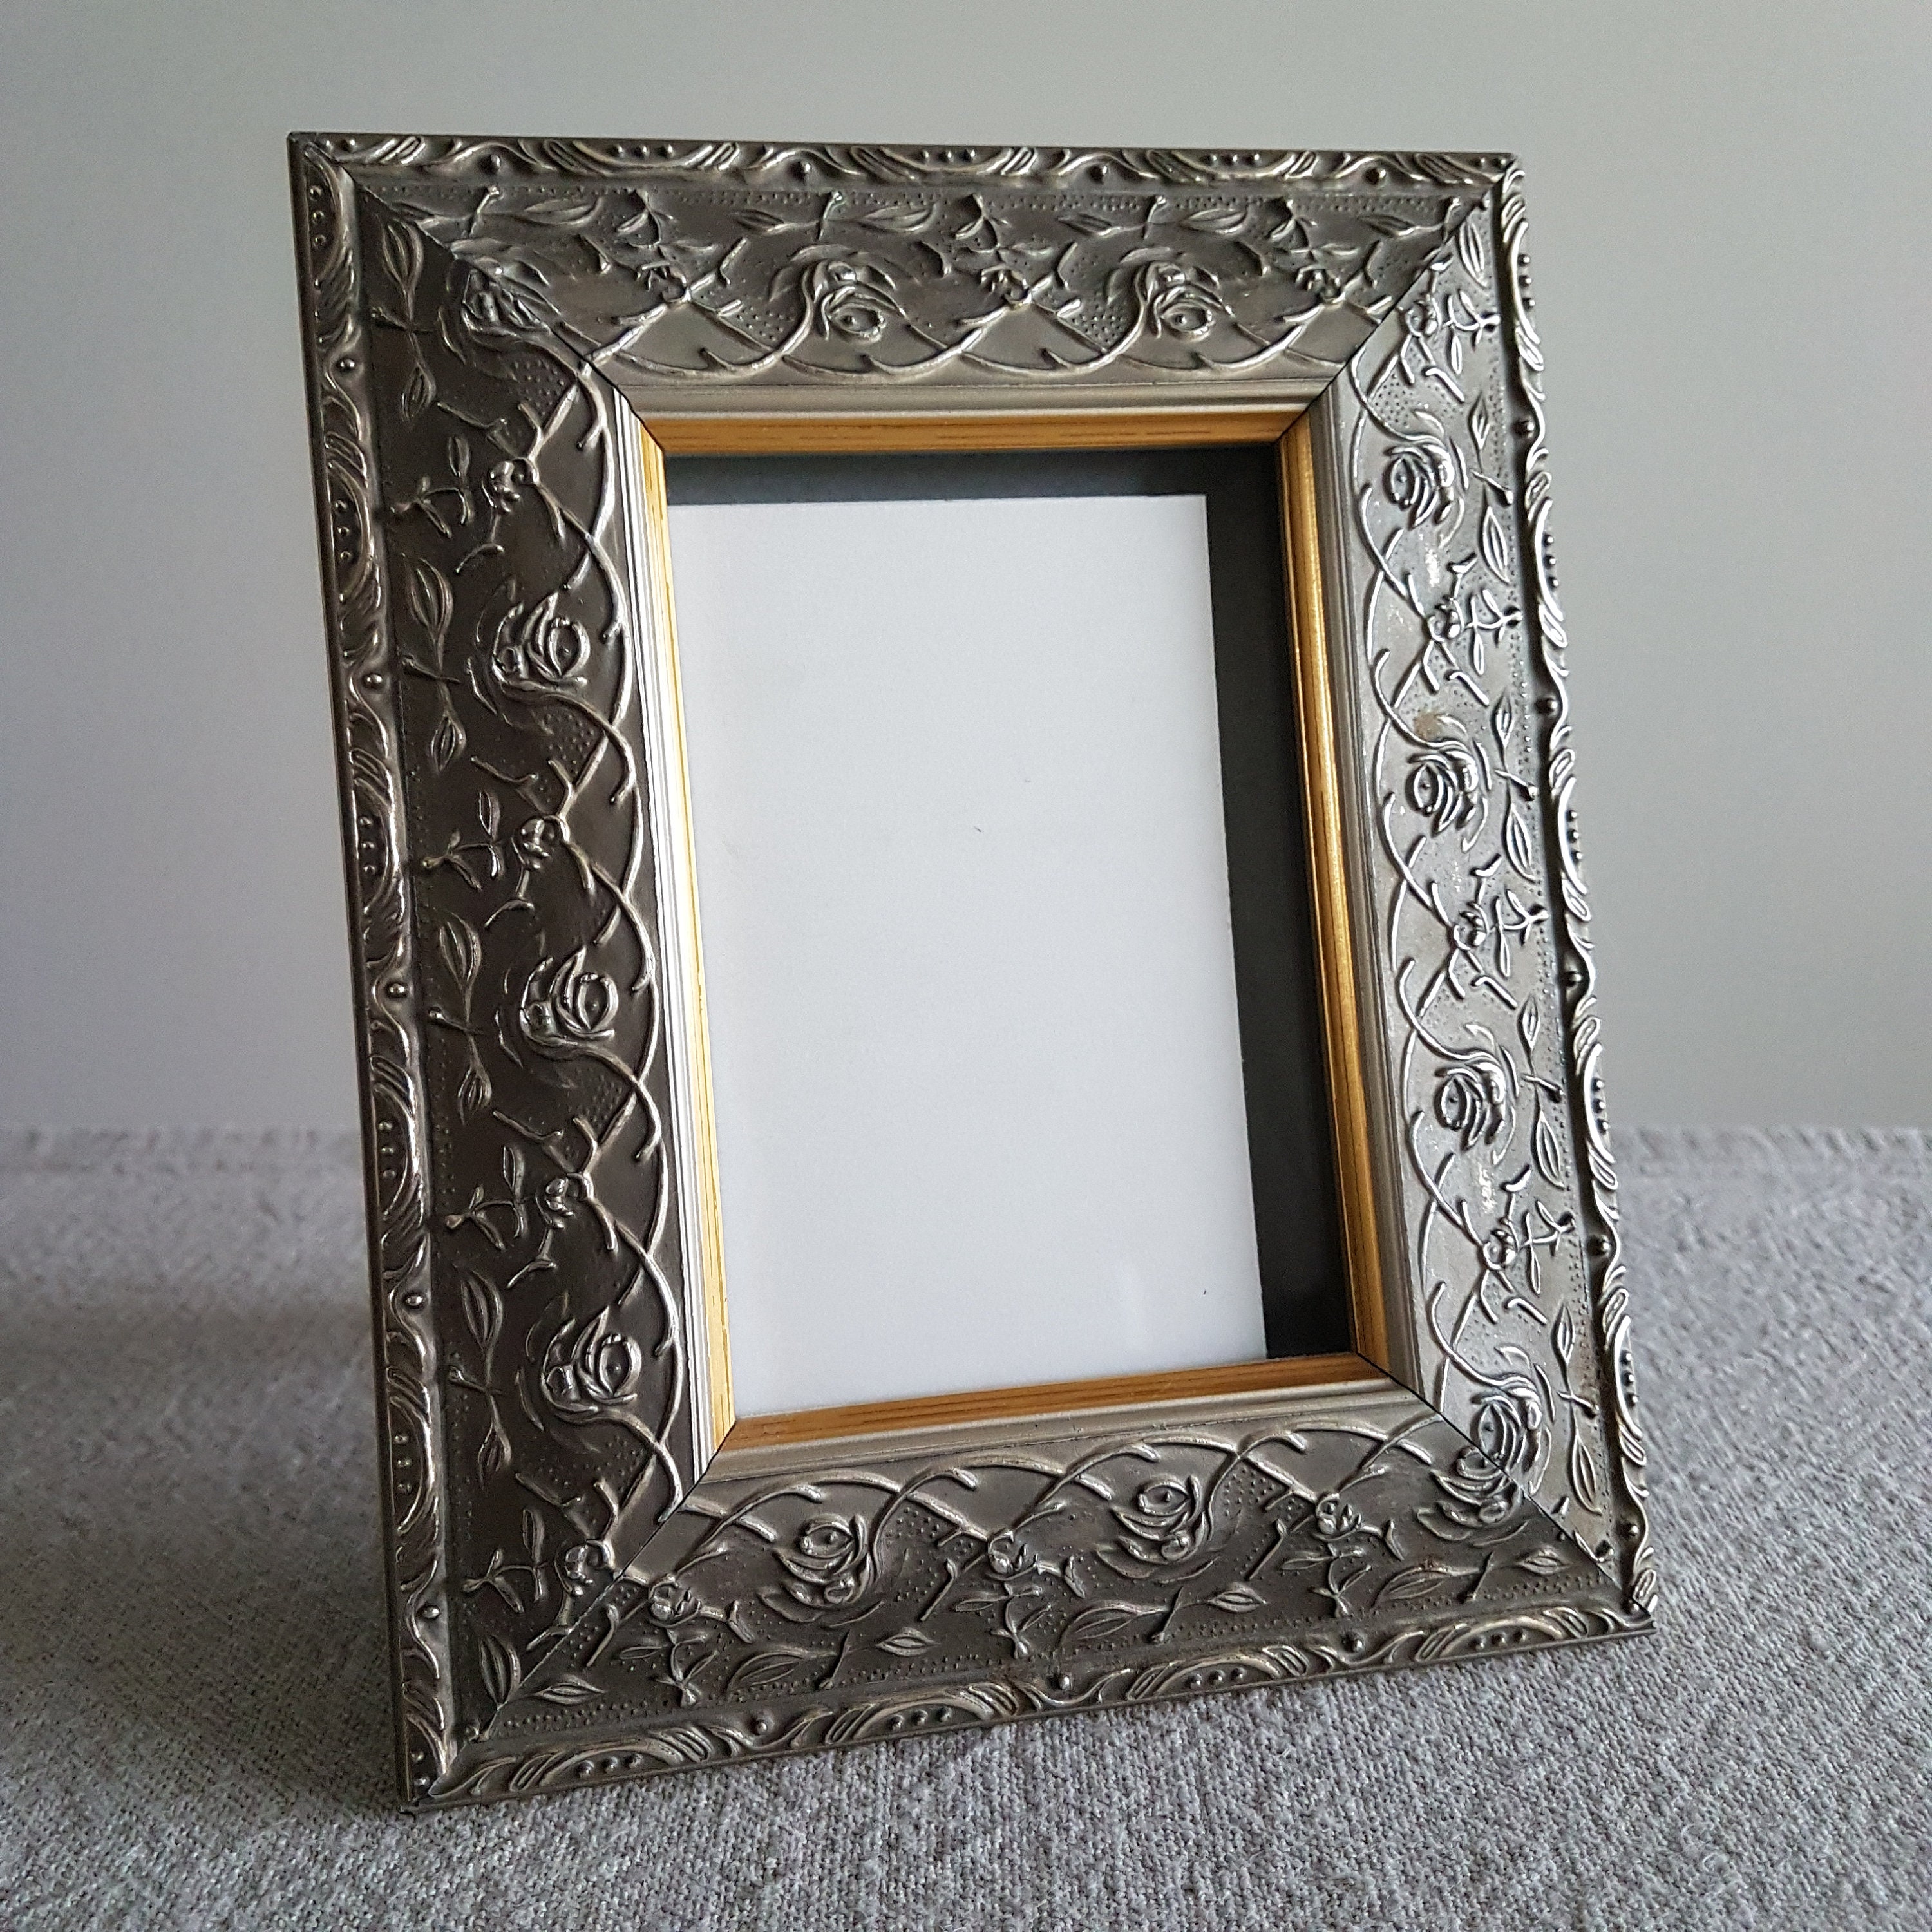 Vintage 3 12 X 5 Pewter And Gilt Look Picture Frame Etsy